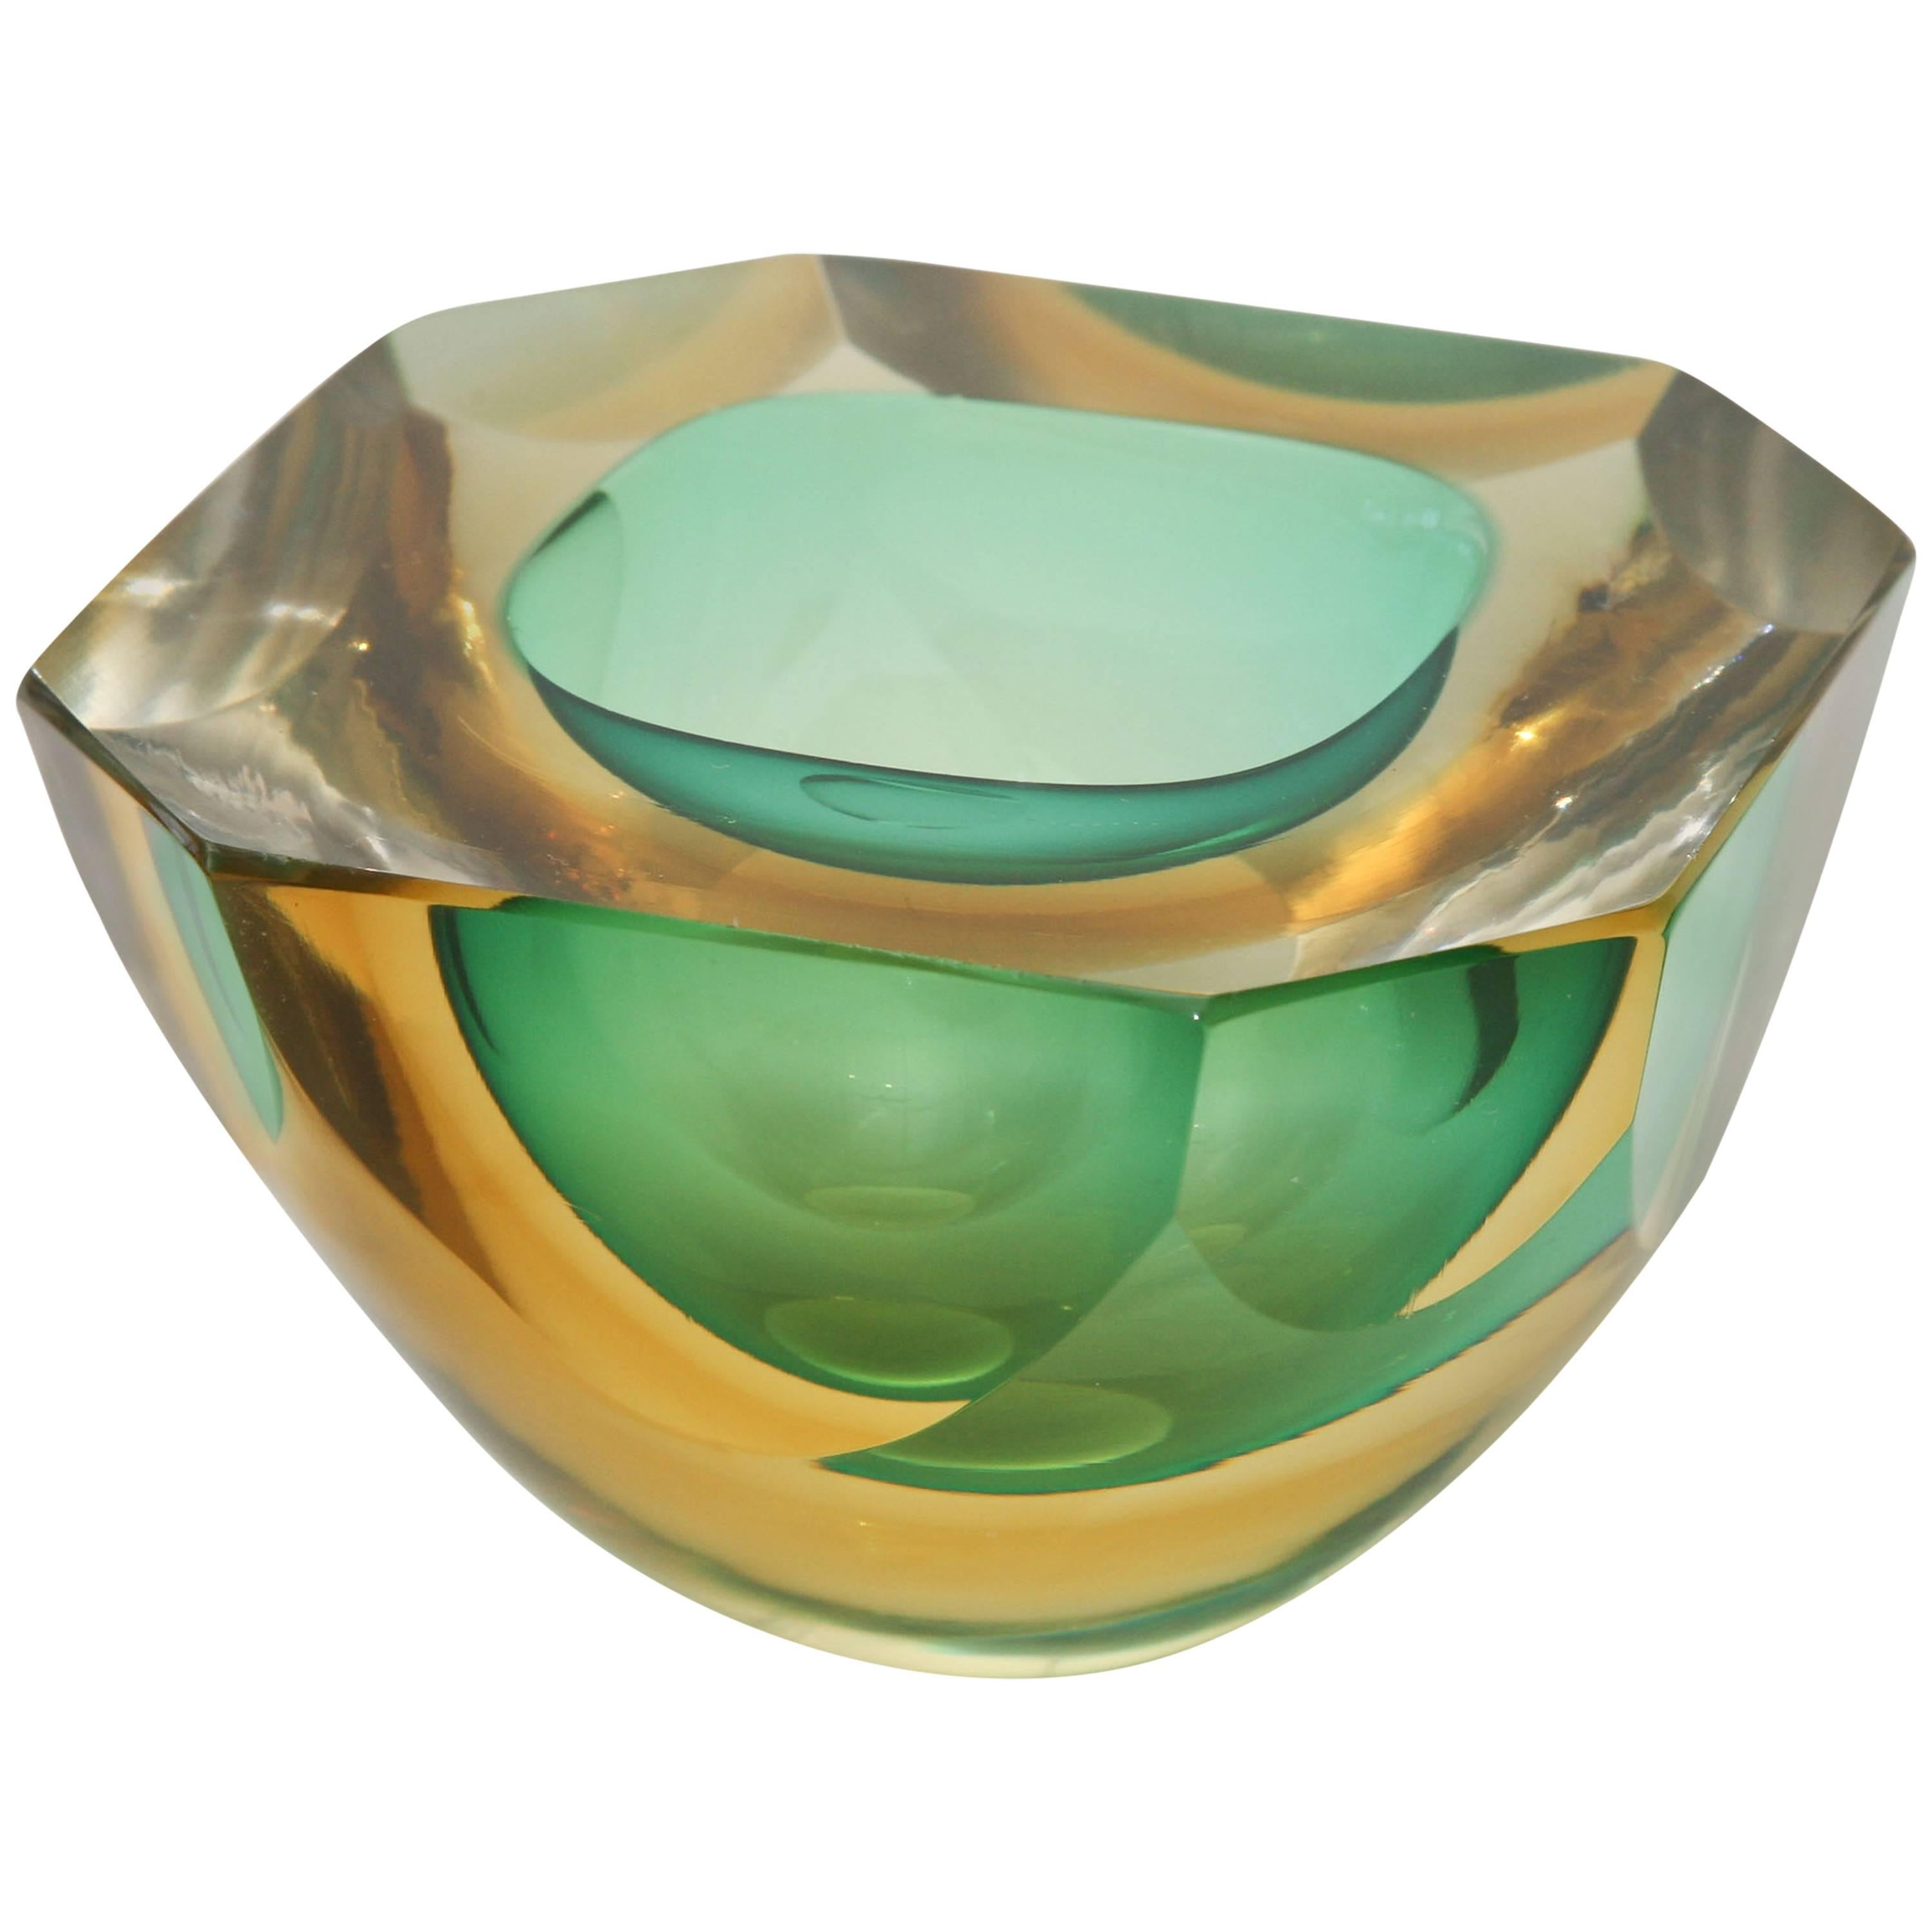 Italian Murano Sommerso Flat Cut Polished Sculptural Geode Bowl